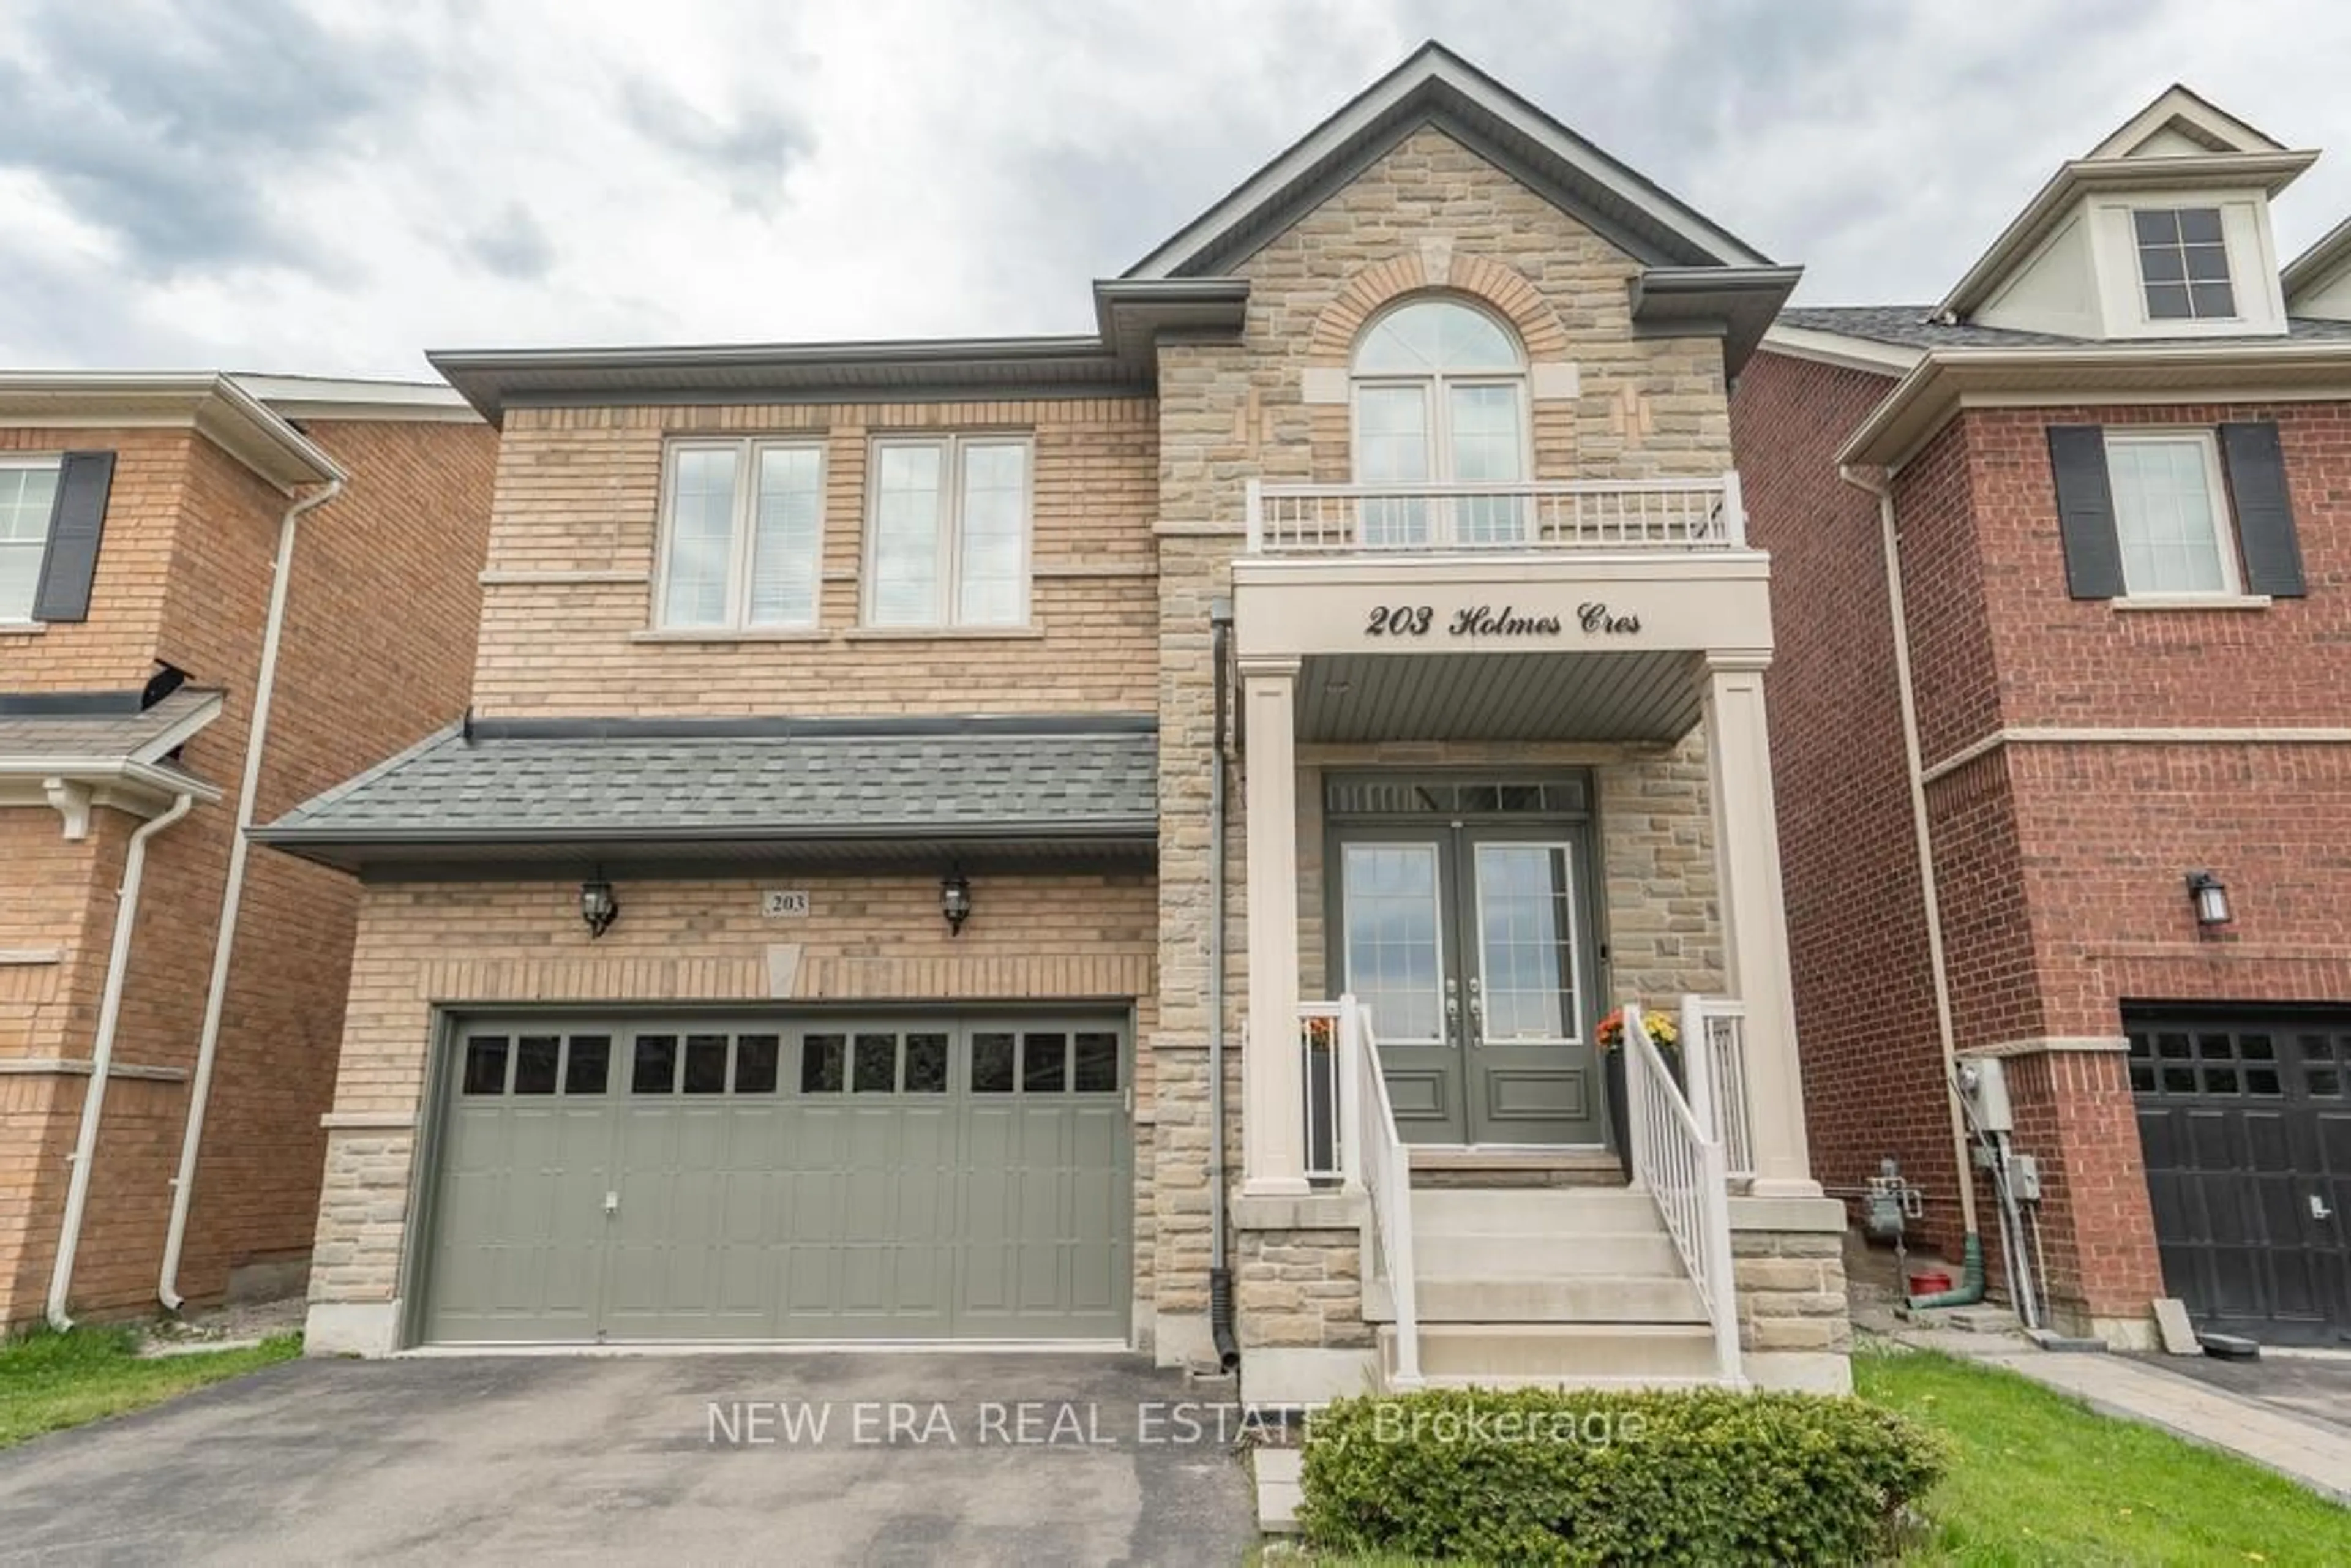 Home with brick exterior material for 203 Holmes Cres, Milton Ontario L9T 0T8